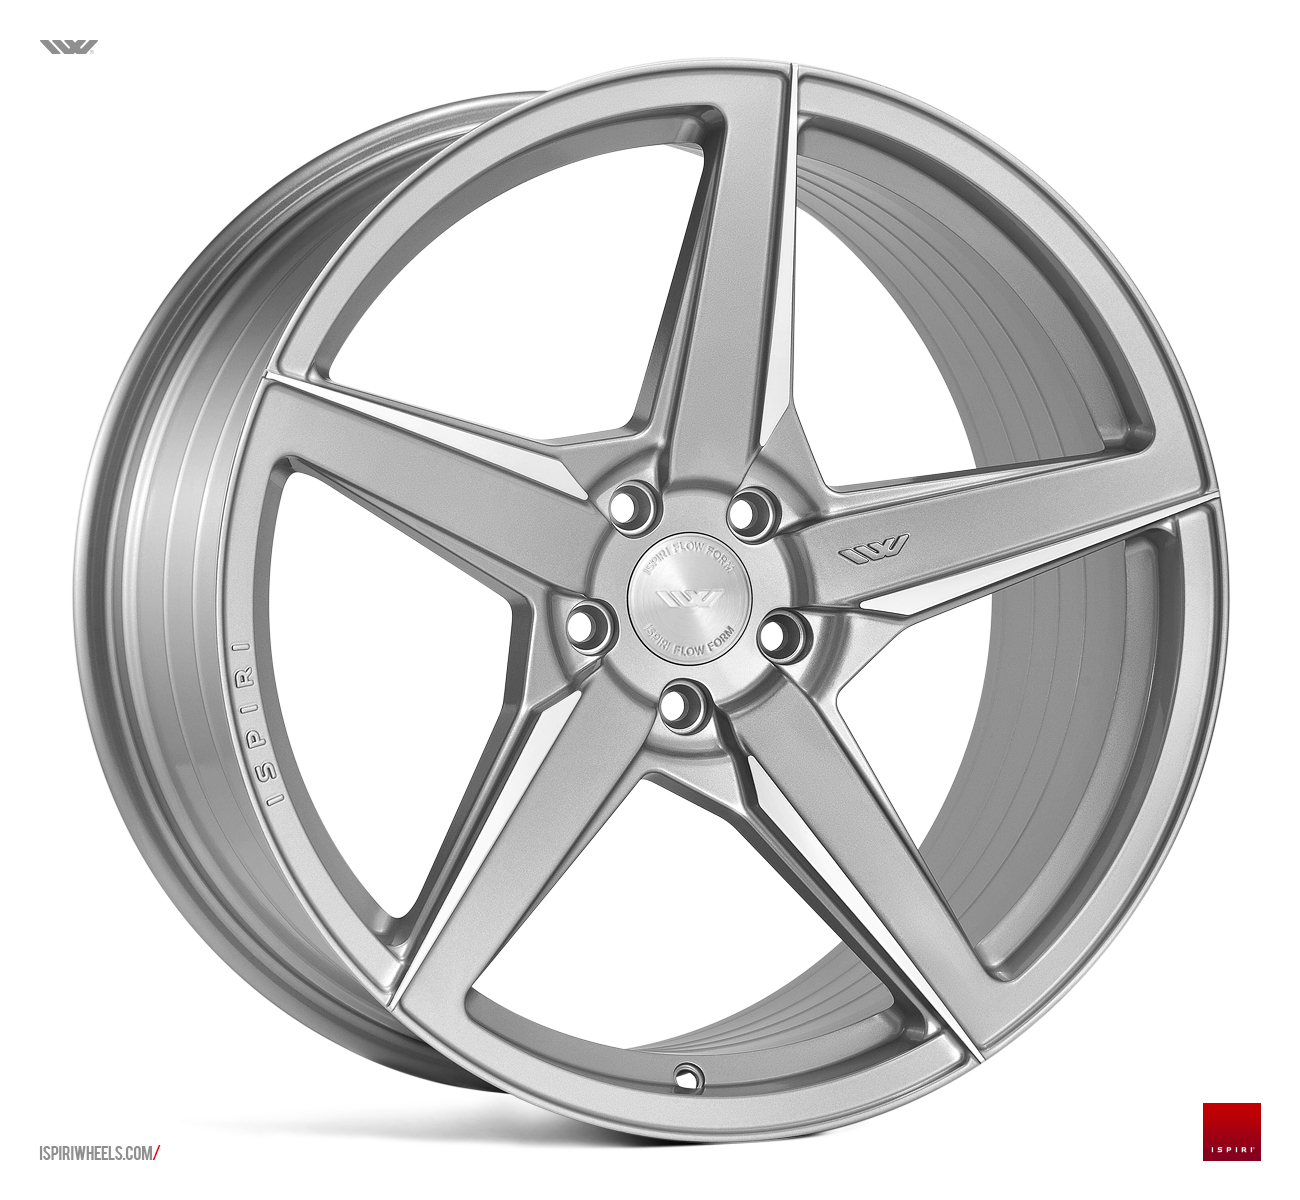 NEW 21" ISPIRI FFR5 5 SPOKE ALLOYS IN PURE SILVER BRUSHED, WITH WIDER 10.5" REAR